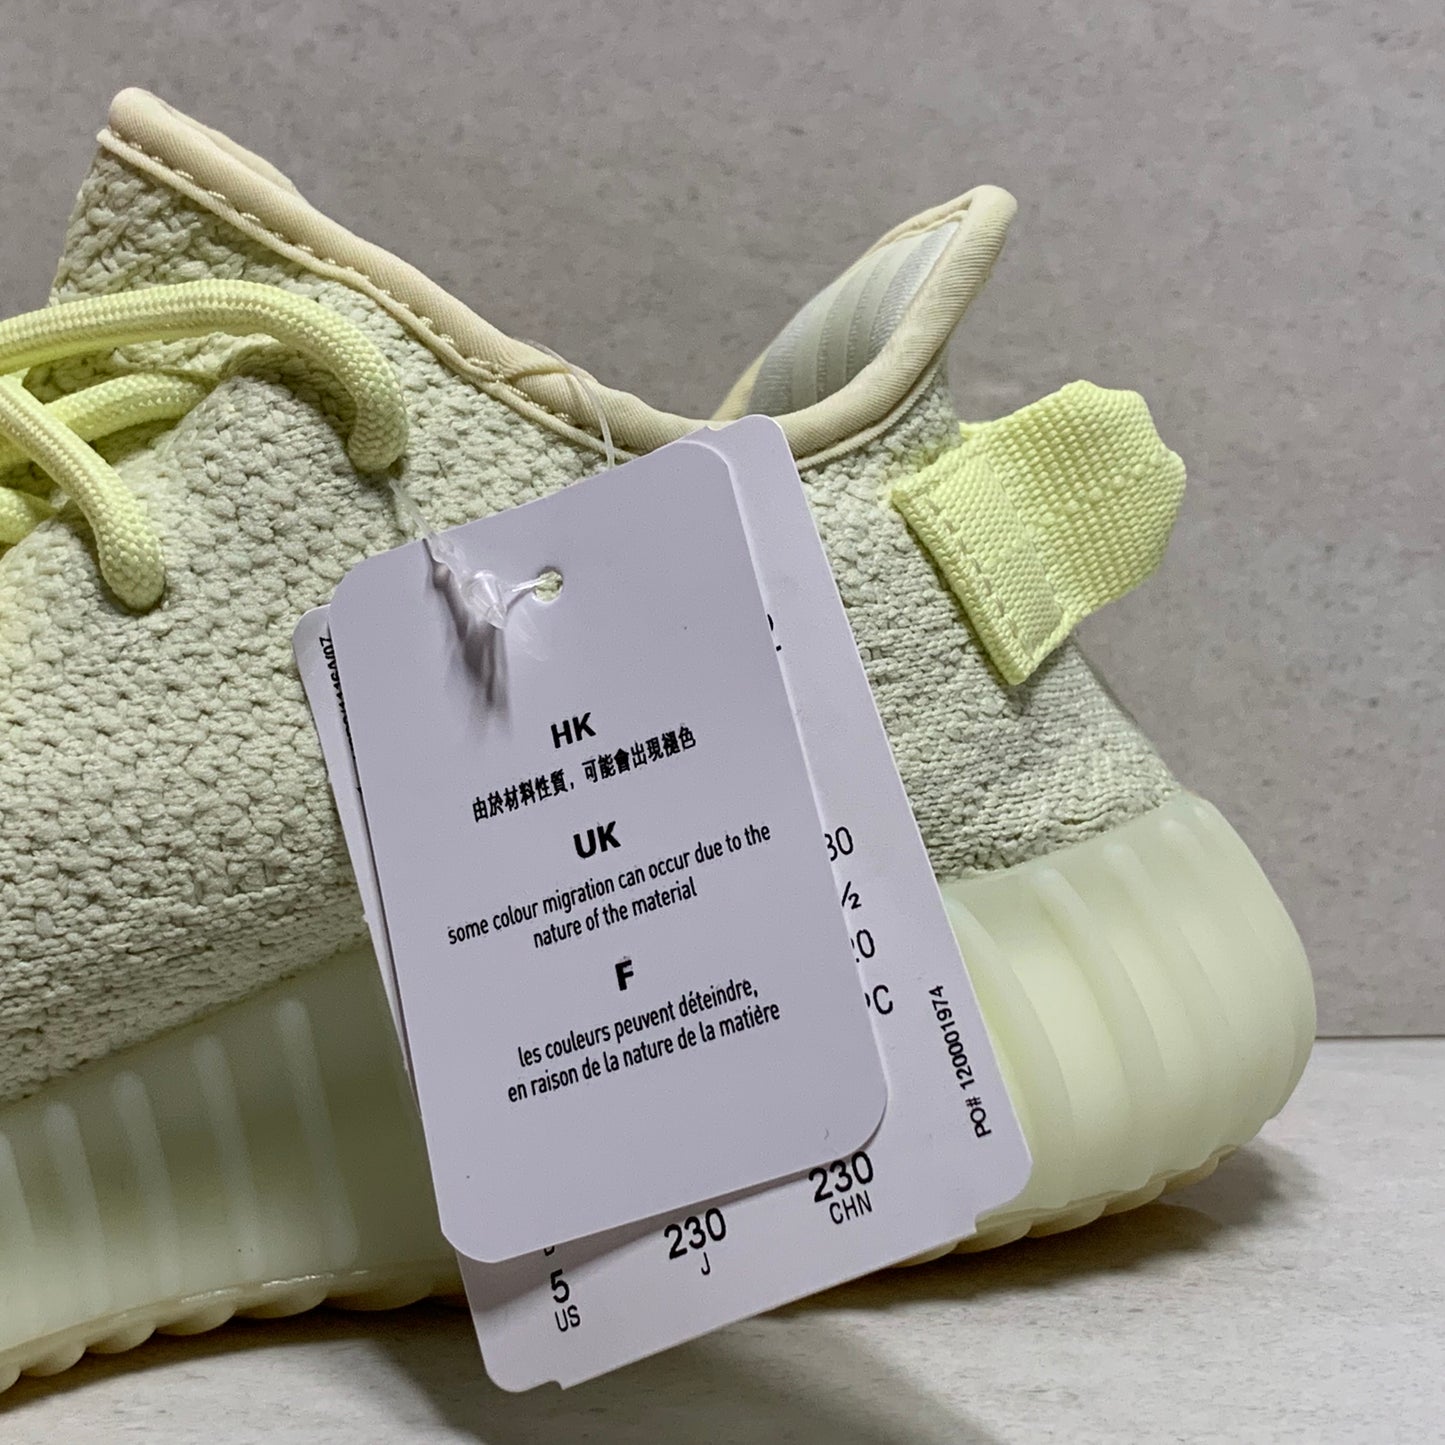 adidas Yeezy Boost 350 V2 Size 5/Women's Size 6.5 Butter F36980